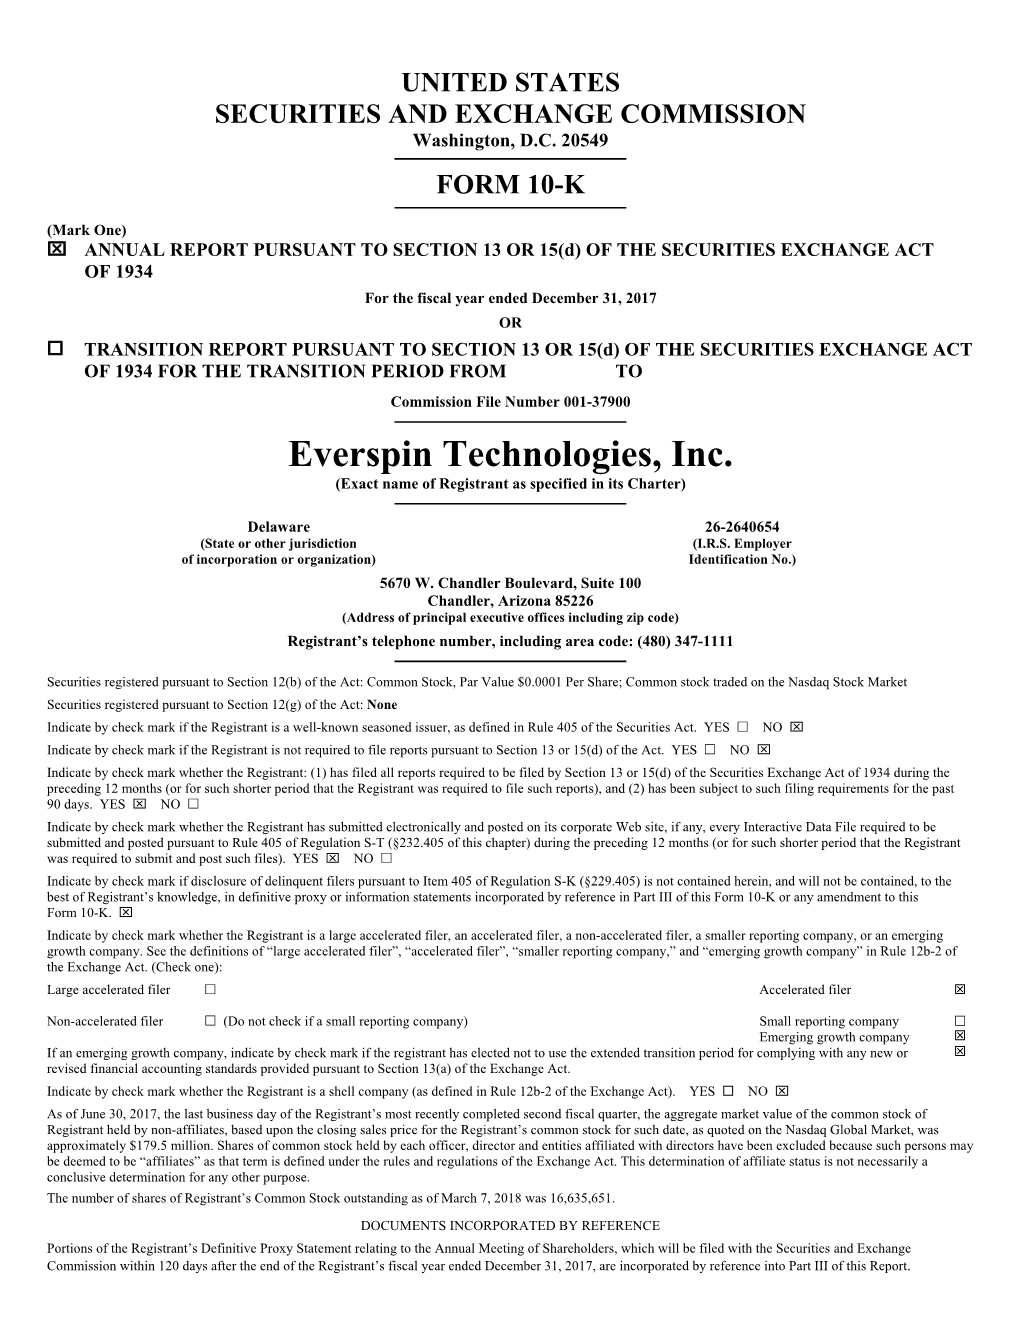 Everspin Technologies, Inc. (Exact Name of Registrant As Specified in Its Charter)